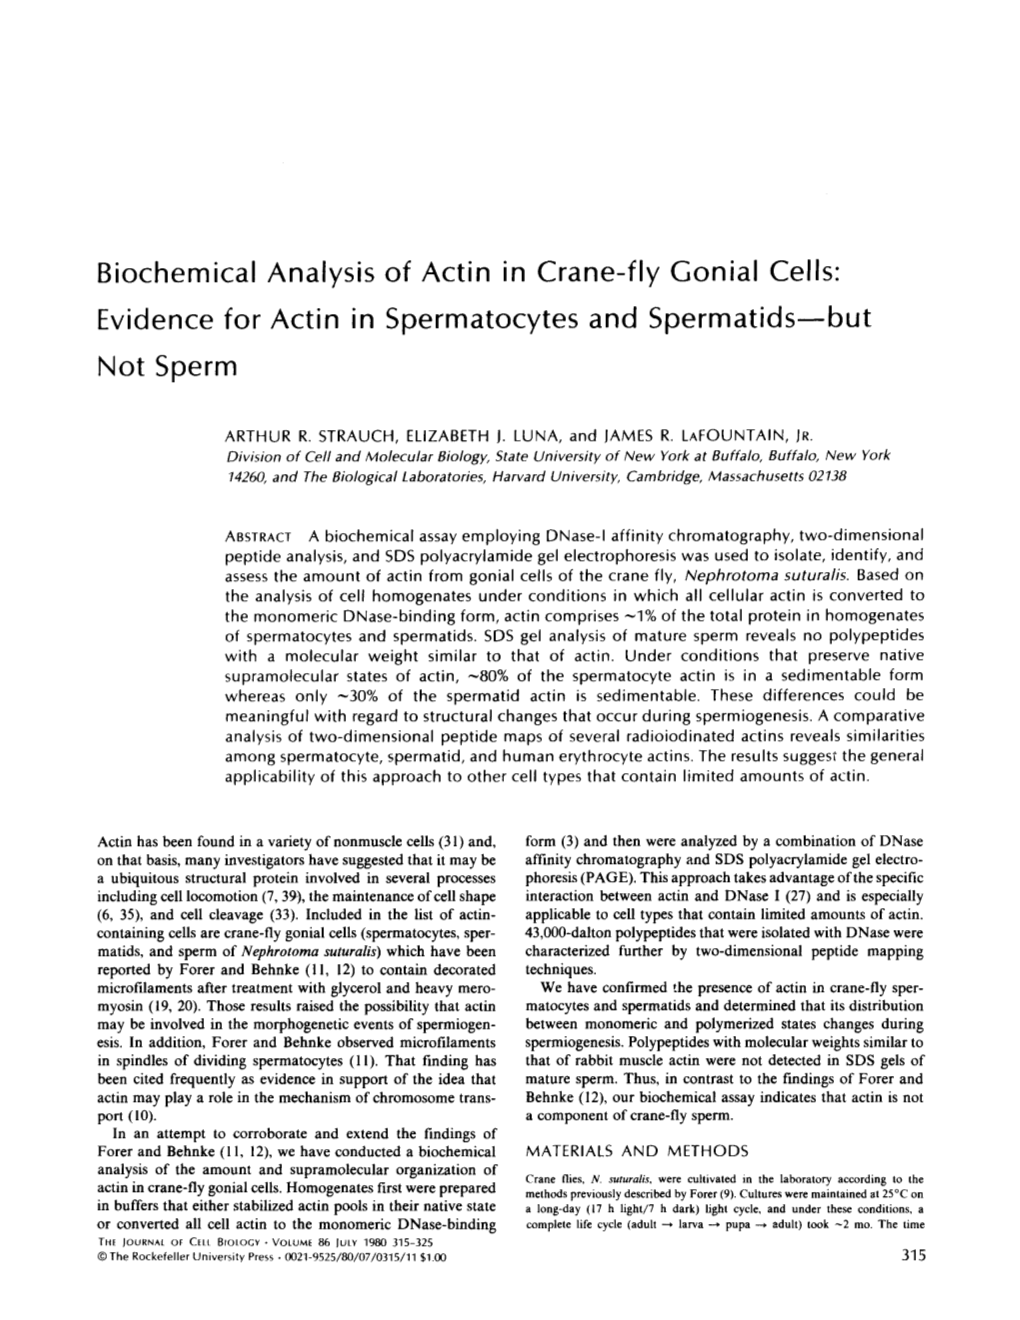 Biochemical Analysis of Actin in Crane-Fly Gonial Cells : Evidence for Actin in Spermatocytes and Spermatids-But Not Sperm